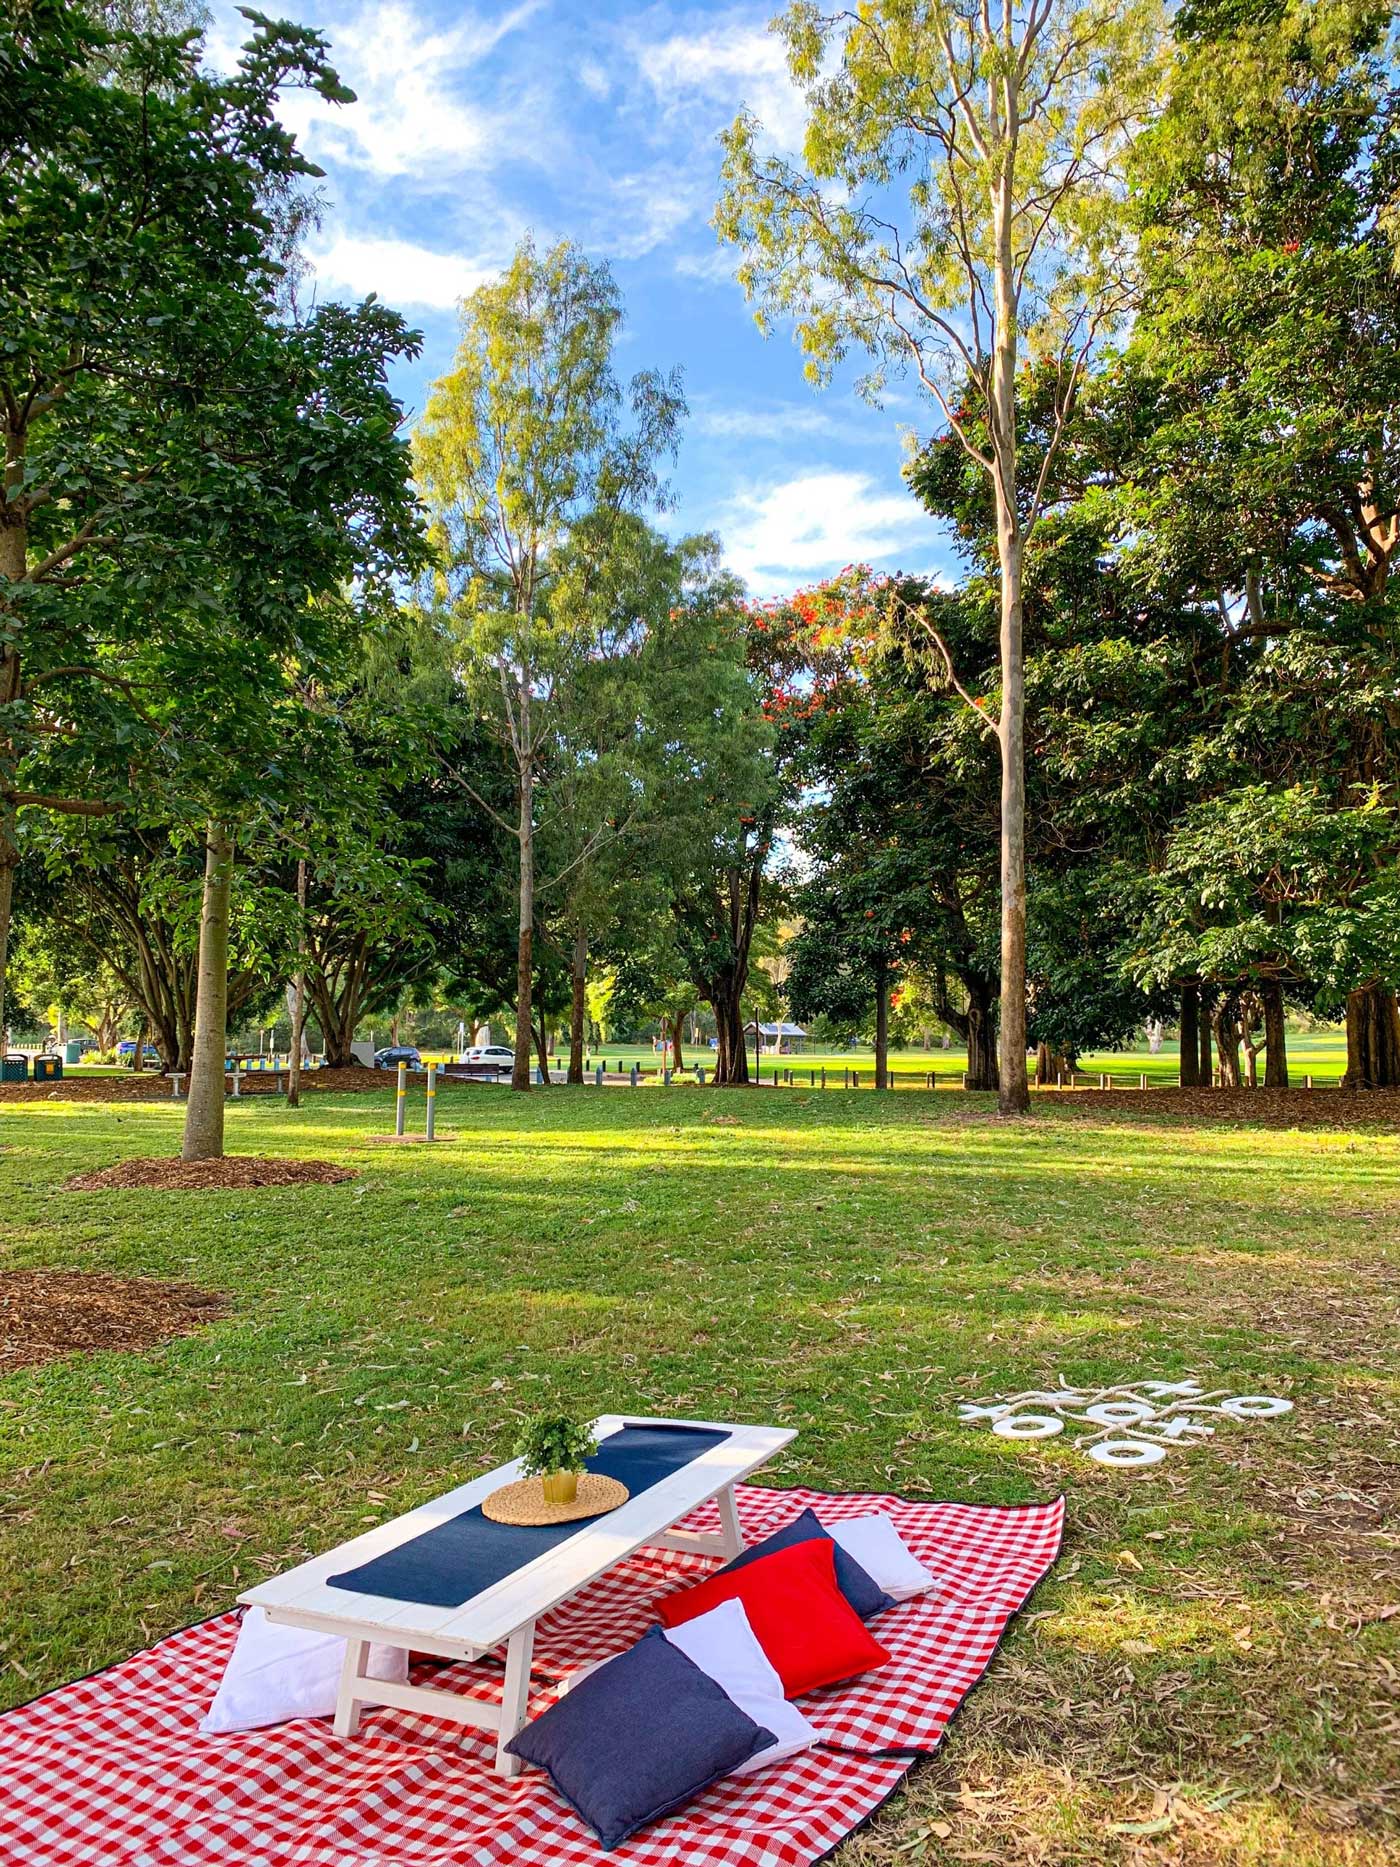 BrisbaneTraditional-Picnic-Style